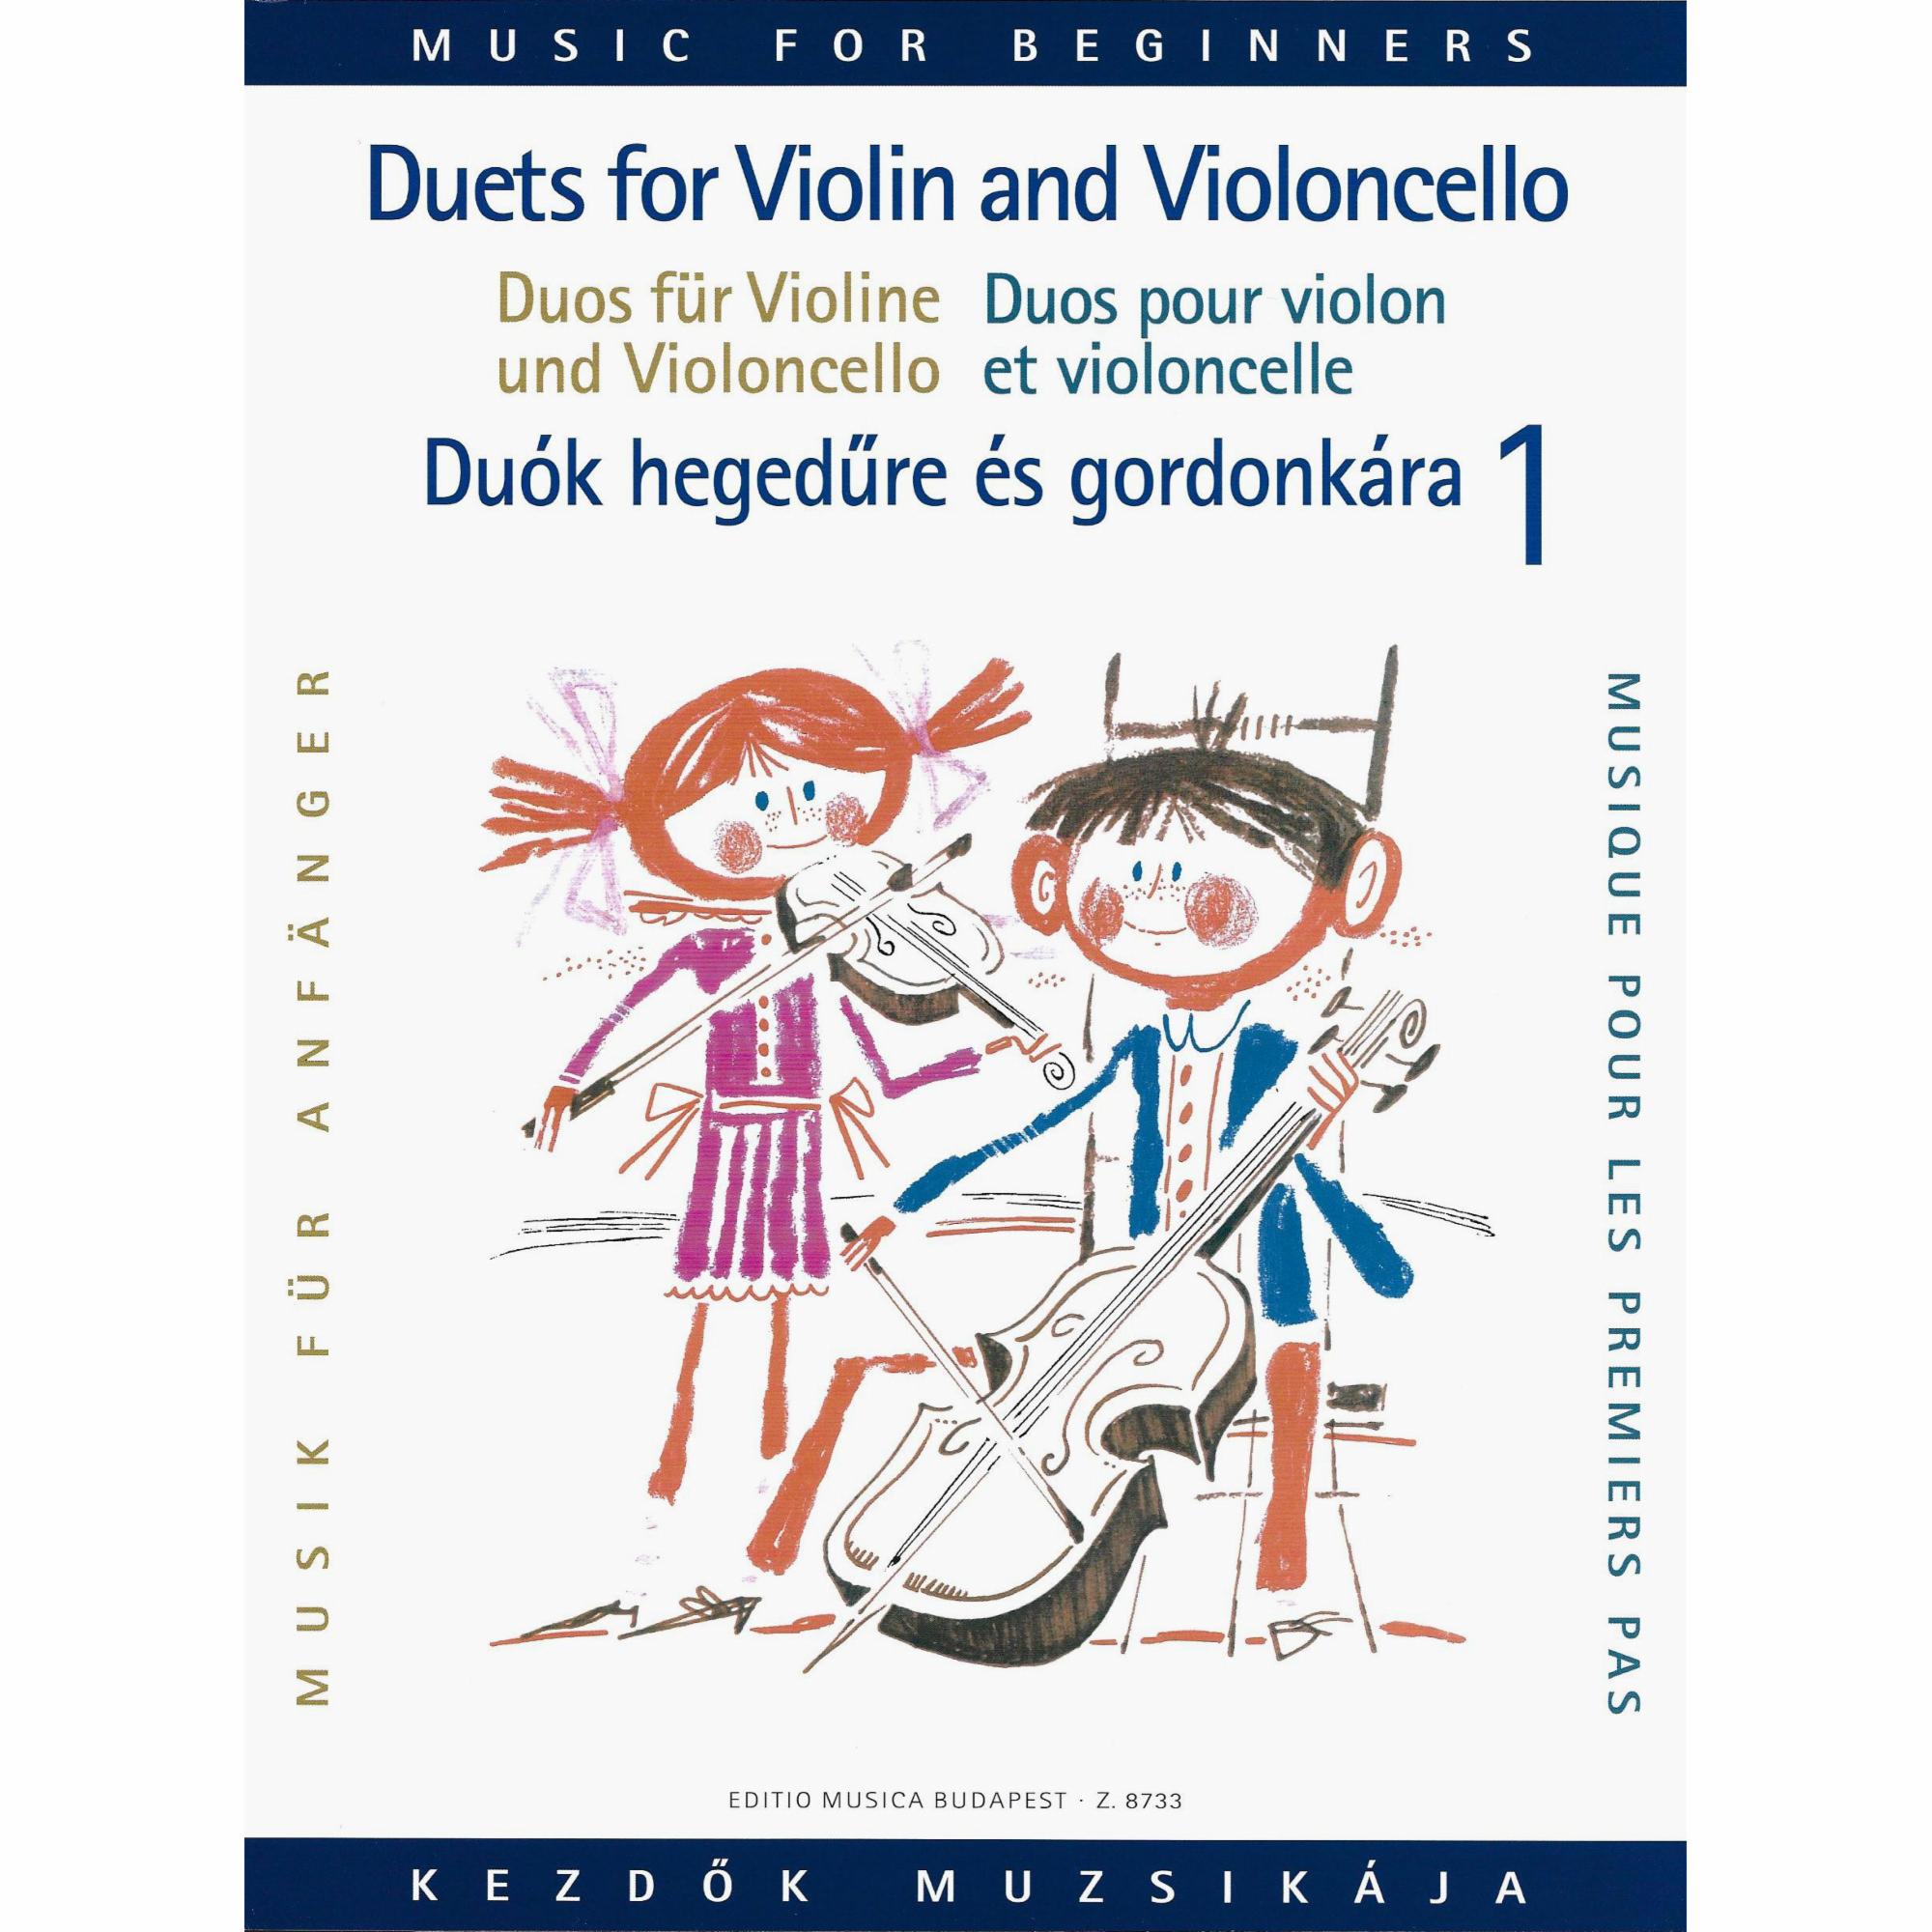 Duets for Violin and Violoncello for Beginners, Vols. 1-2